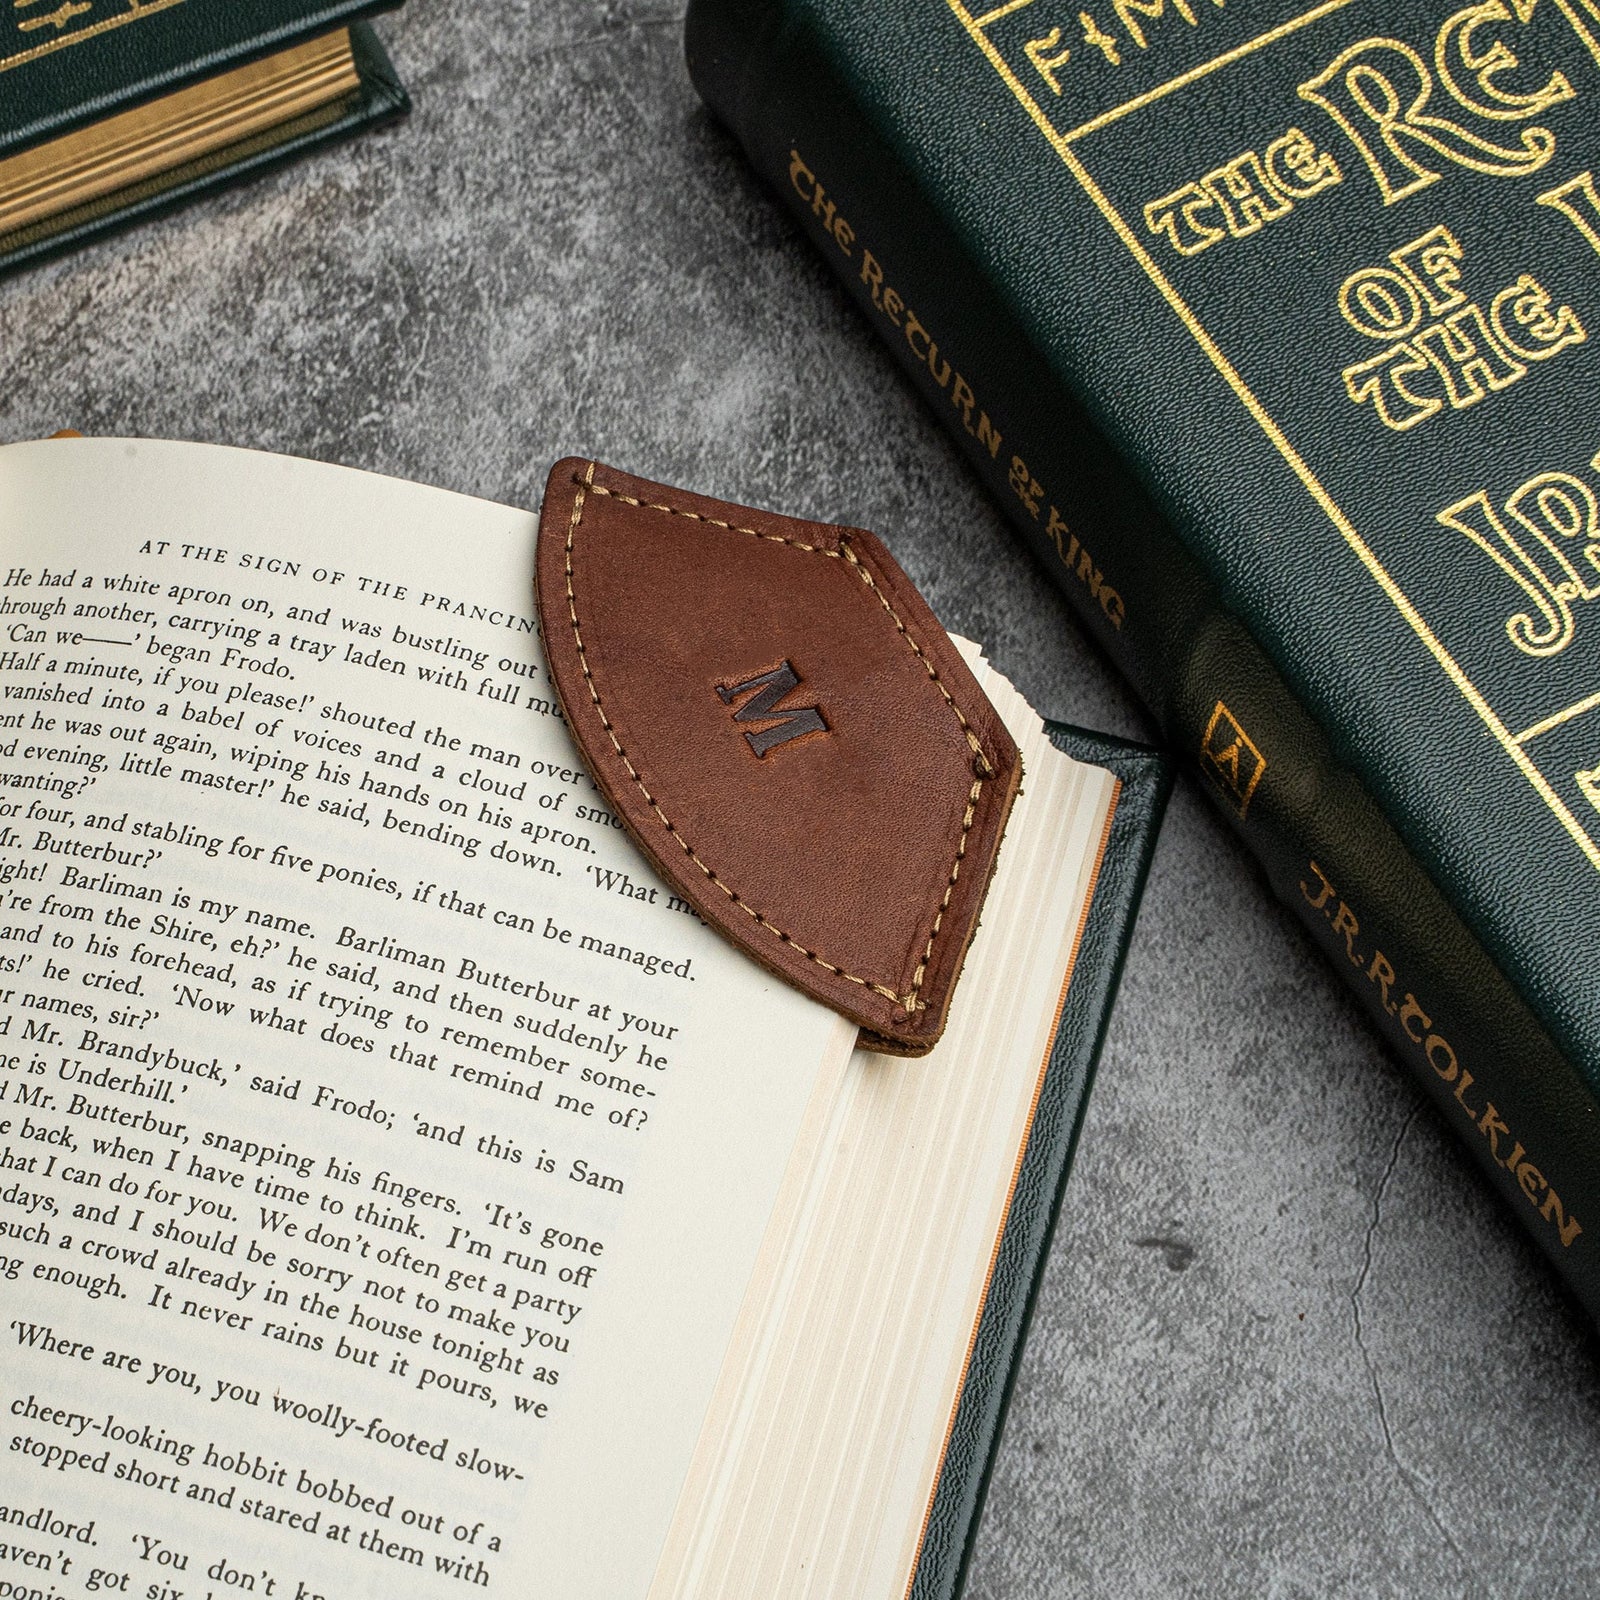 The Jefferson Personalized Fine Leather Card Holder Wallet - Holtz